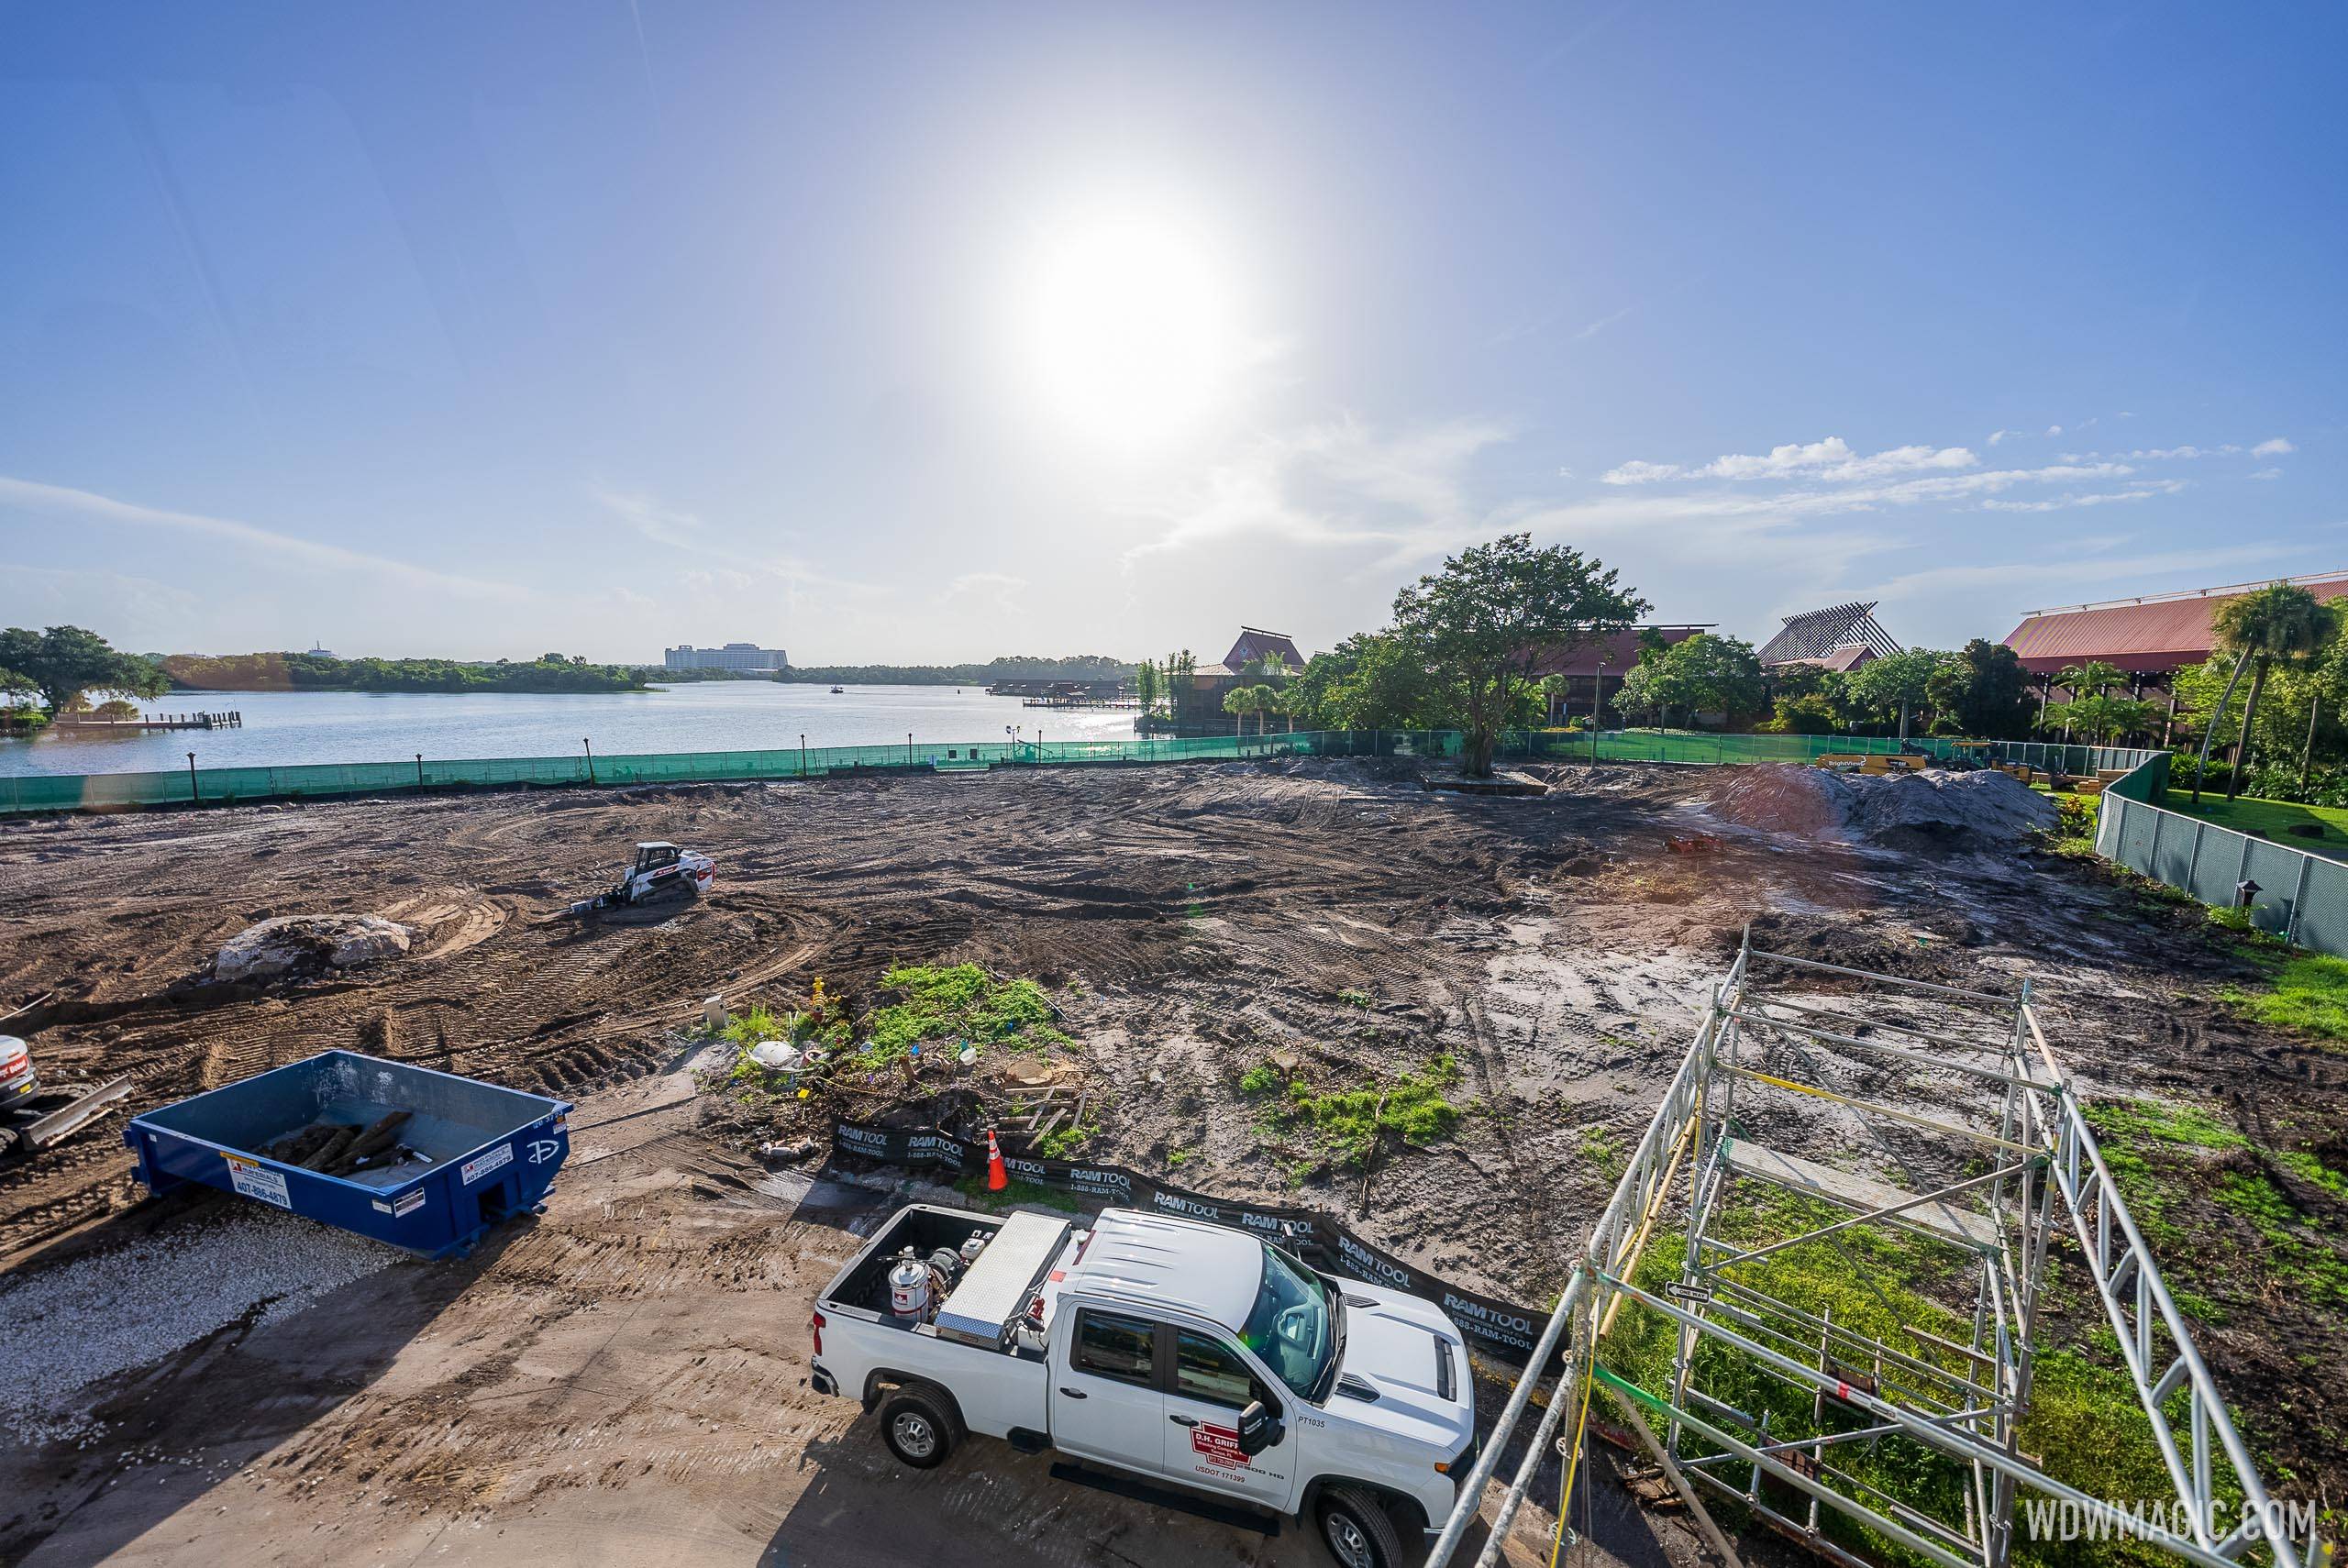 Ground cleared for Disney Vacation Club tower - July 26 2022